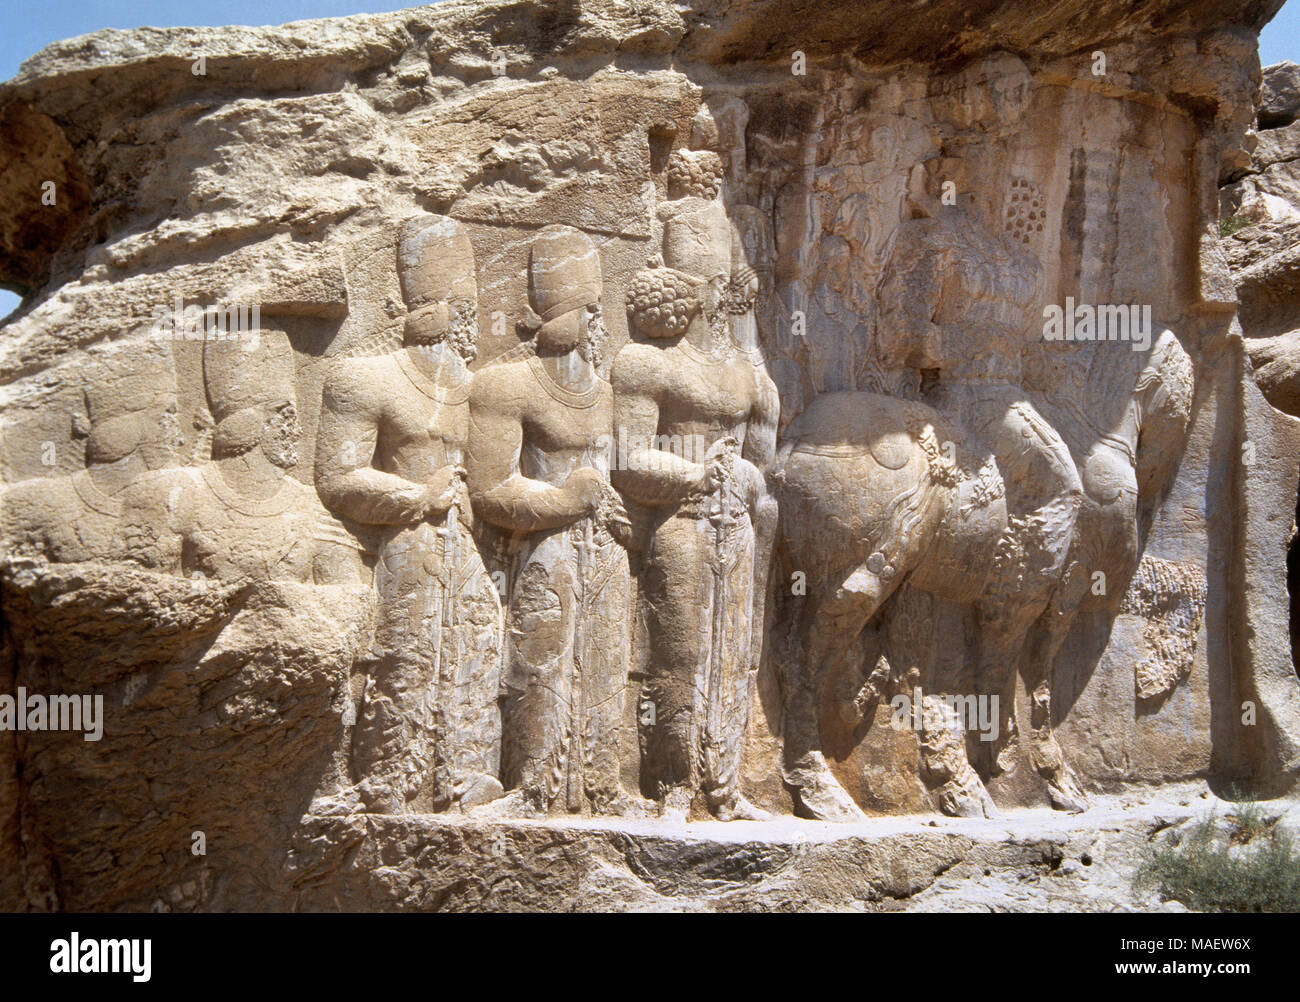 Sasanians. Relief of Shapur's Parade depicting the King Shapur I riding a horse, folllowed by his sons and other characters. 3rd century. It celebrates the king's military victory in 244 over the Roman emperor Valerian and Philip the Arab. Naqsh-e Rajab. Fars Province, Iran (Old Persia). Stock Photo